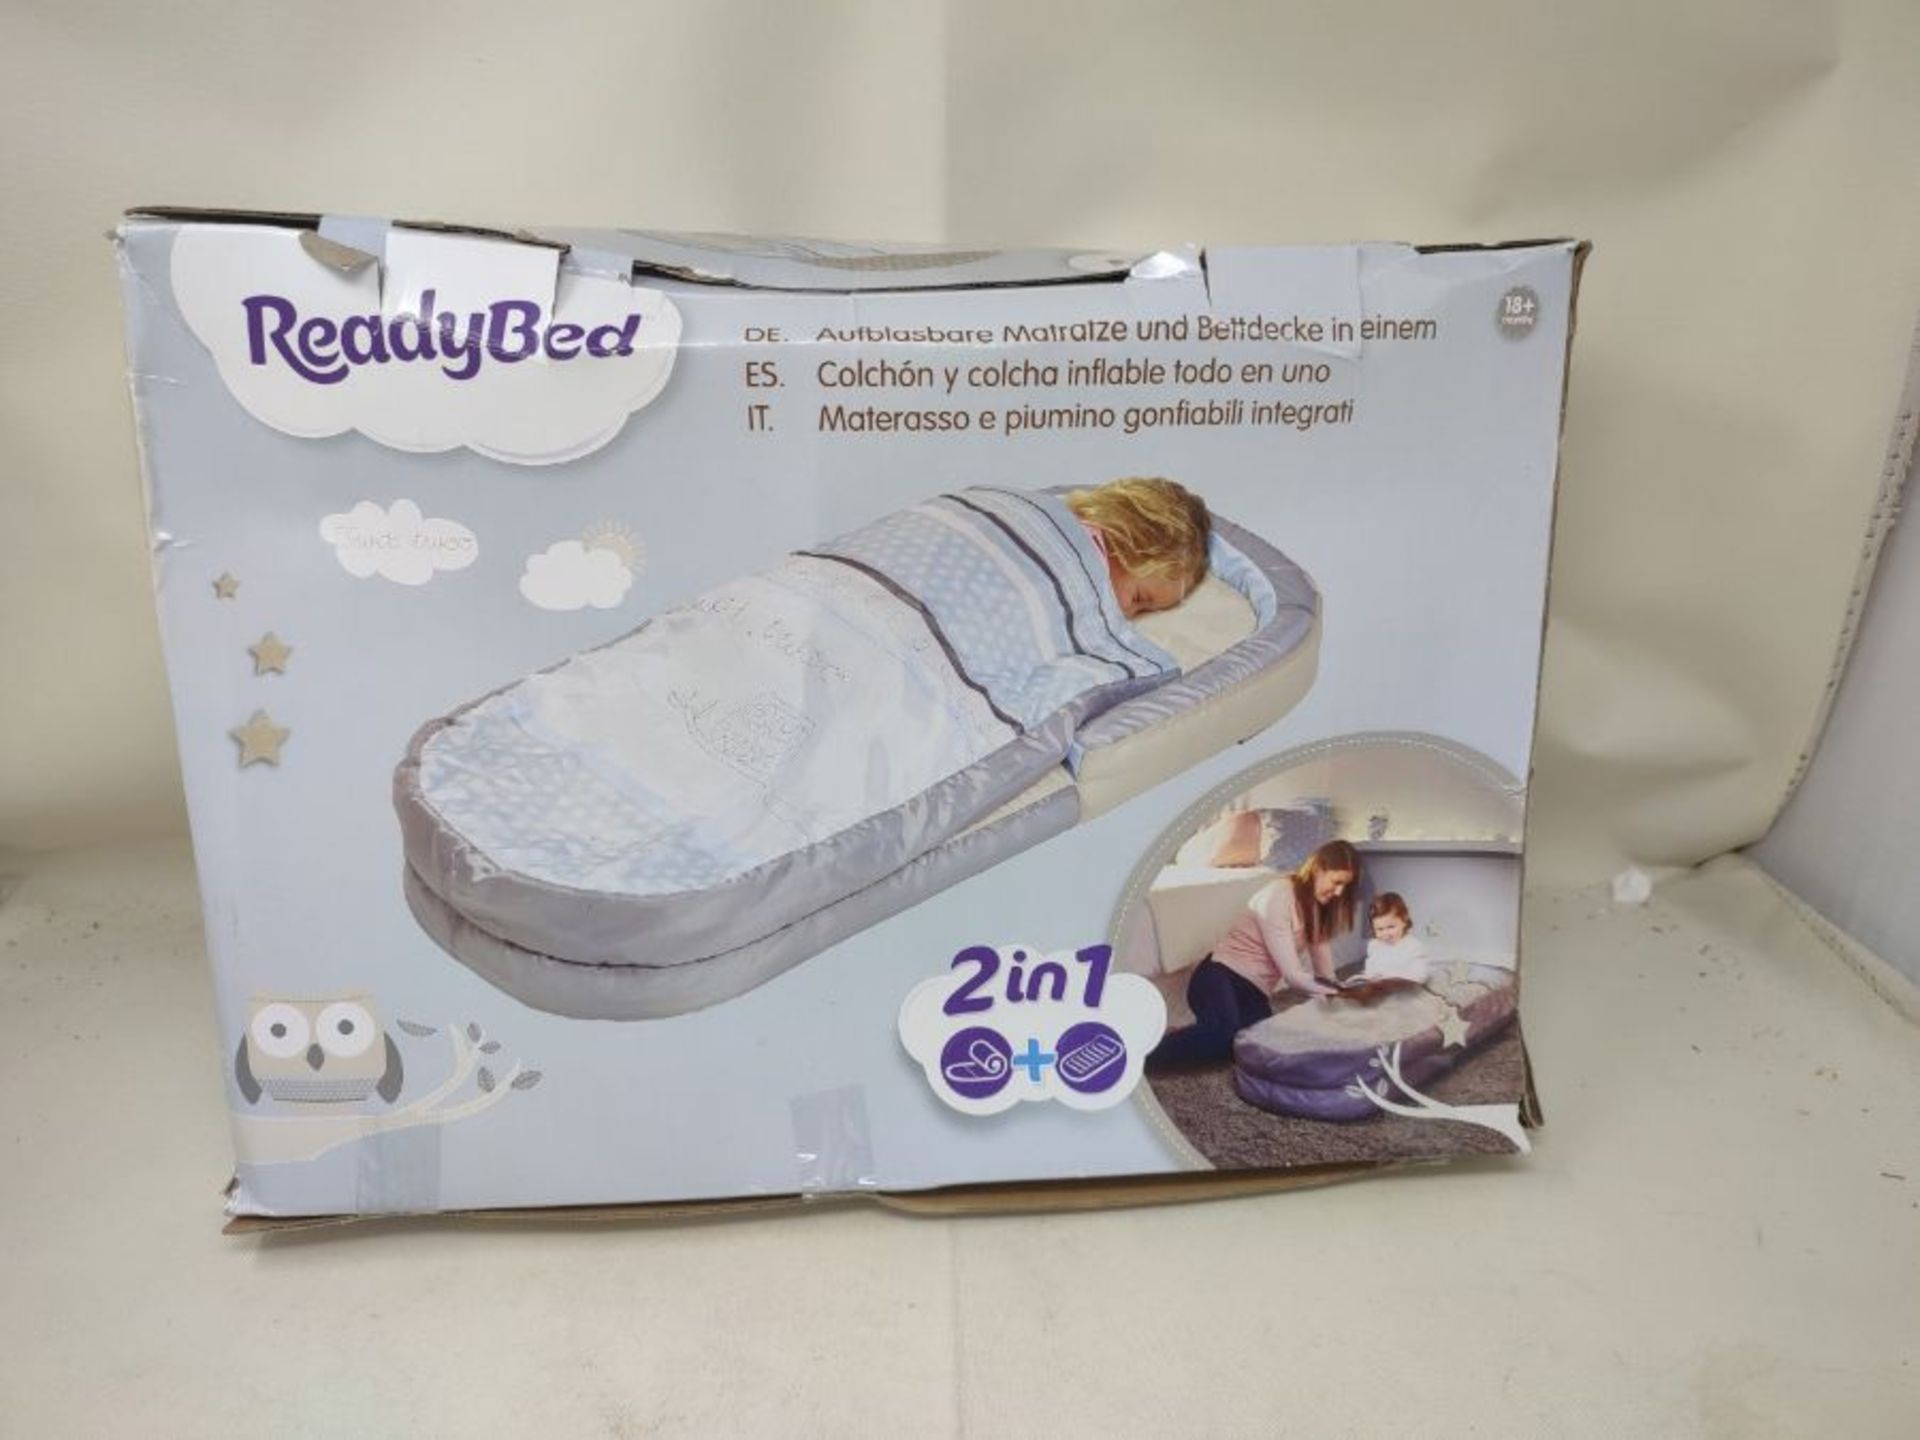 Sleepytime Owl My First ReadyBed - Inflatable Toddler Air Bed and Sleeping Bag in one, - Image 2 of 3